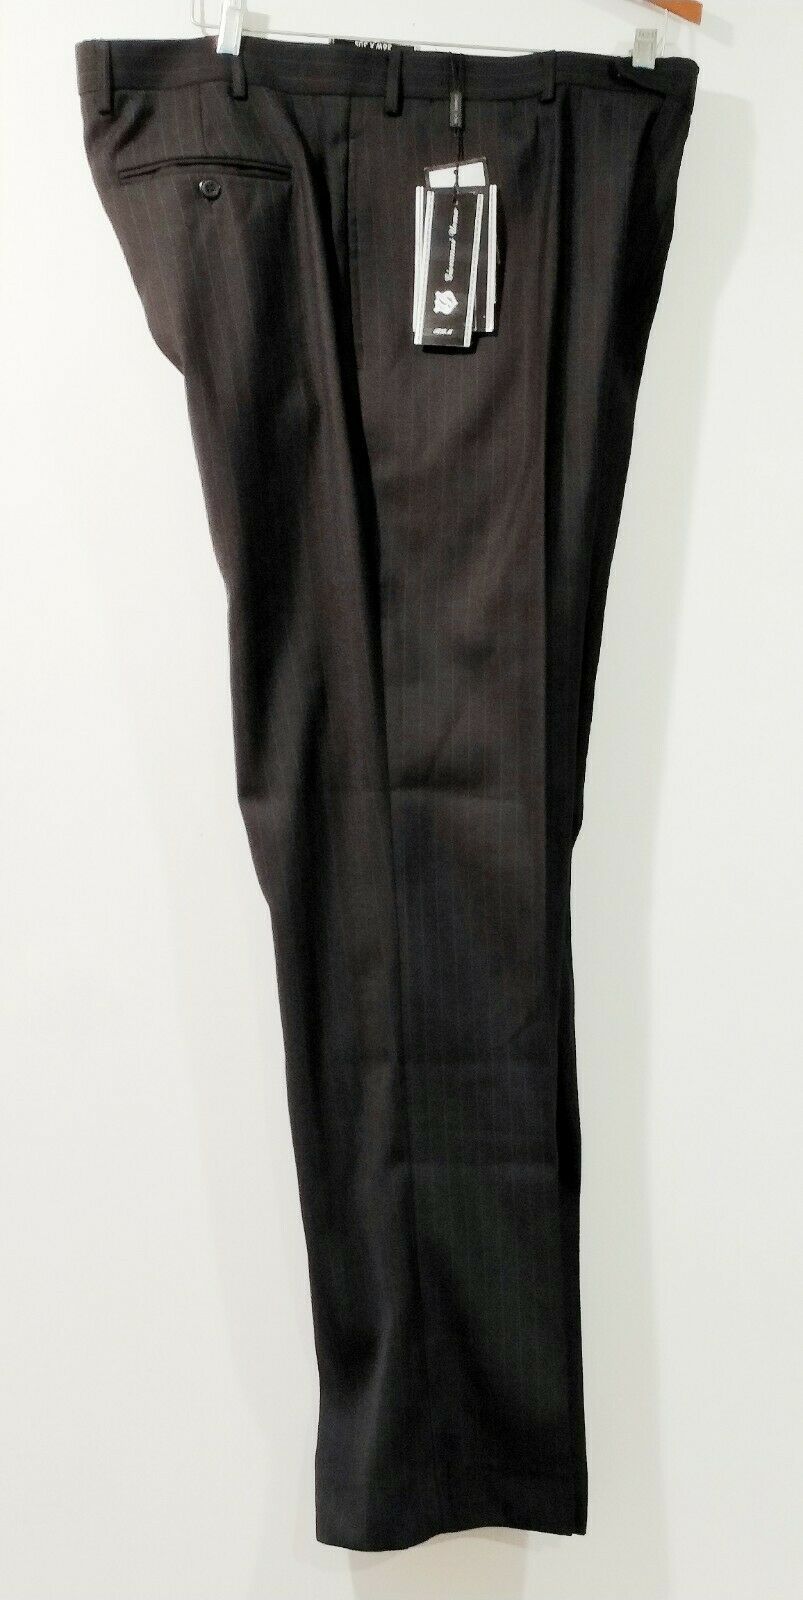 NWT Men Dress Pants by Signature Collection Size 42 inseam 27 Black Color